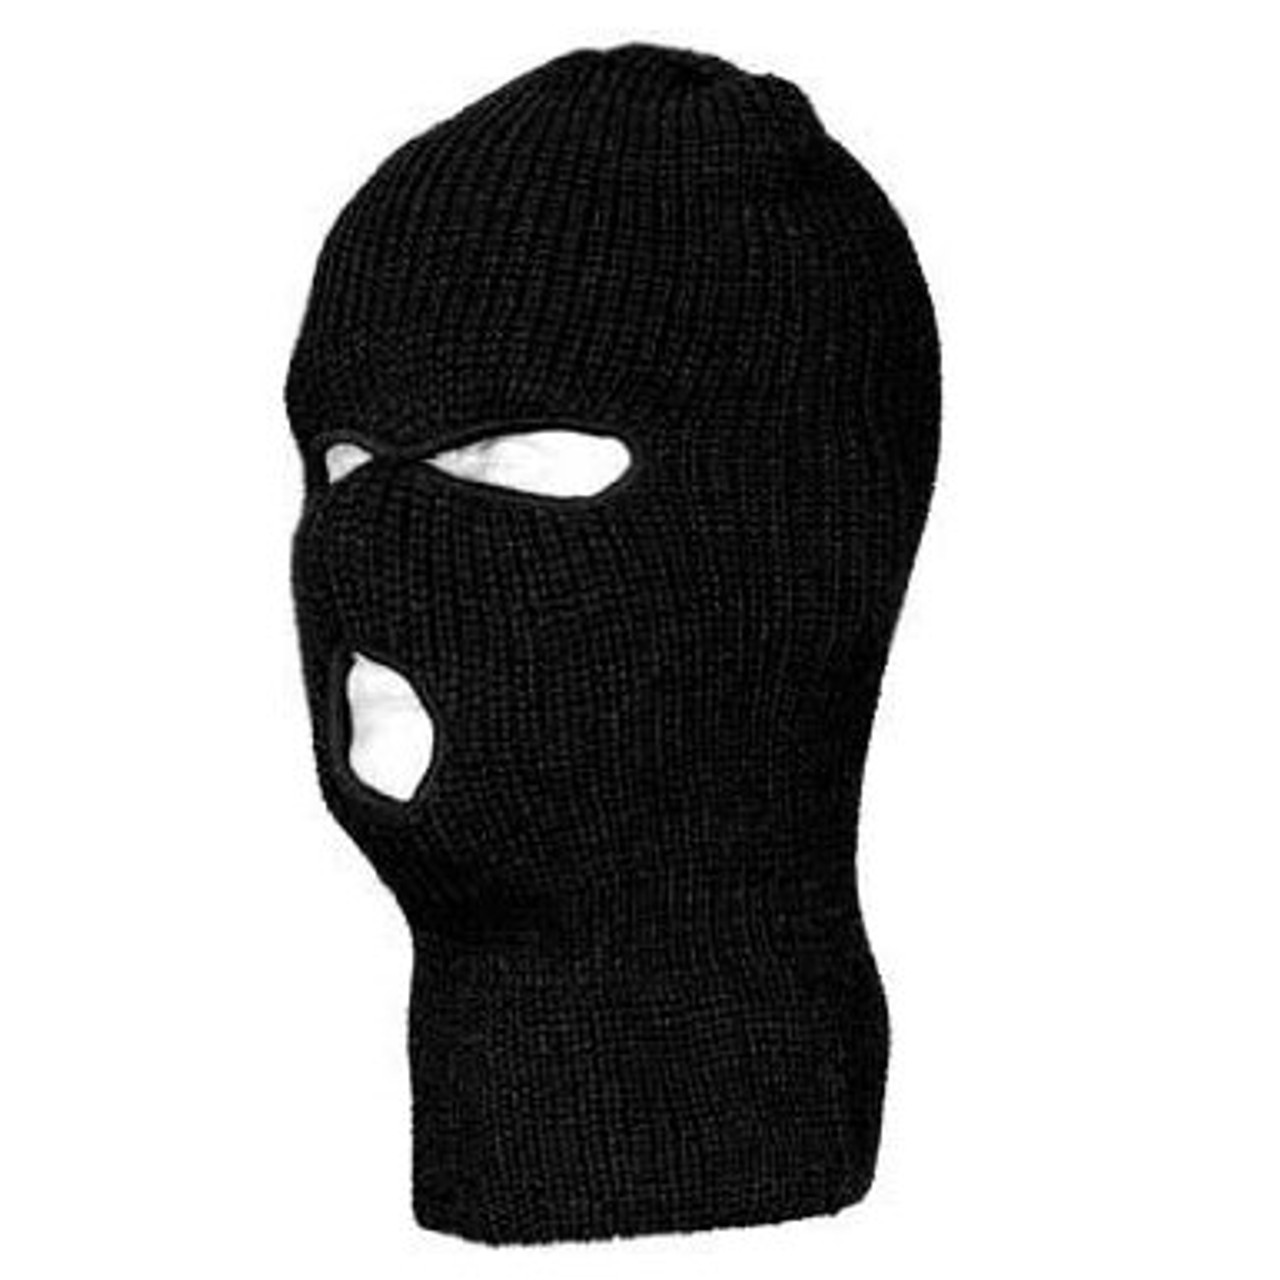 Thief Mask - 3-Hole Knit Robber Black 12 PACK | 3051D - Private Island ...